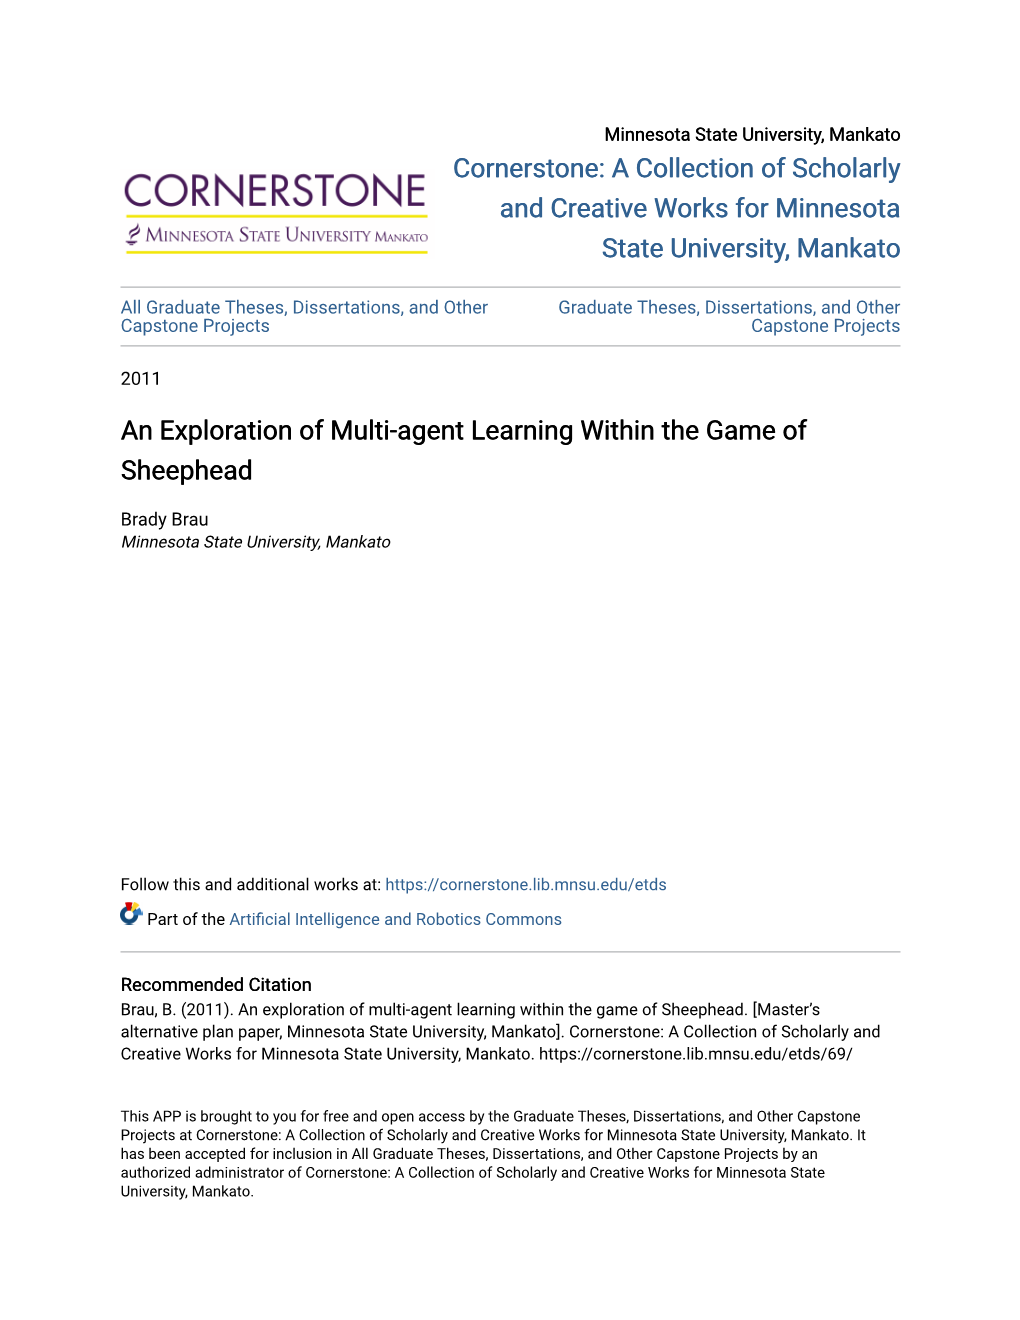 An Exploration of Multi-Agent Learning Within the Game of Sheephead